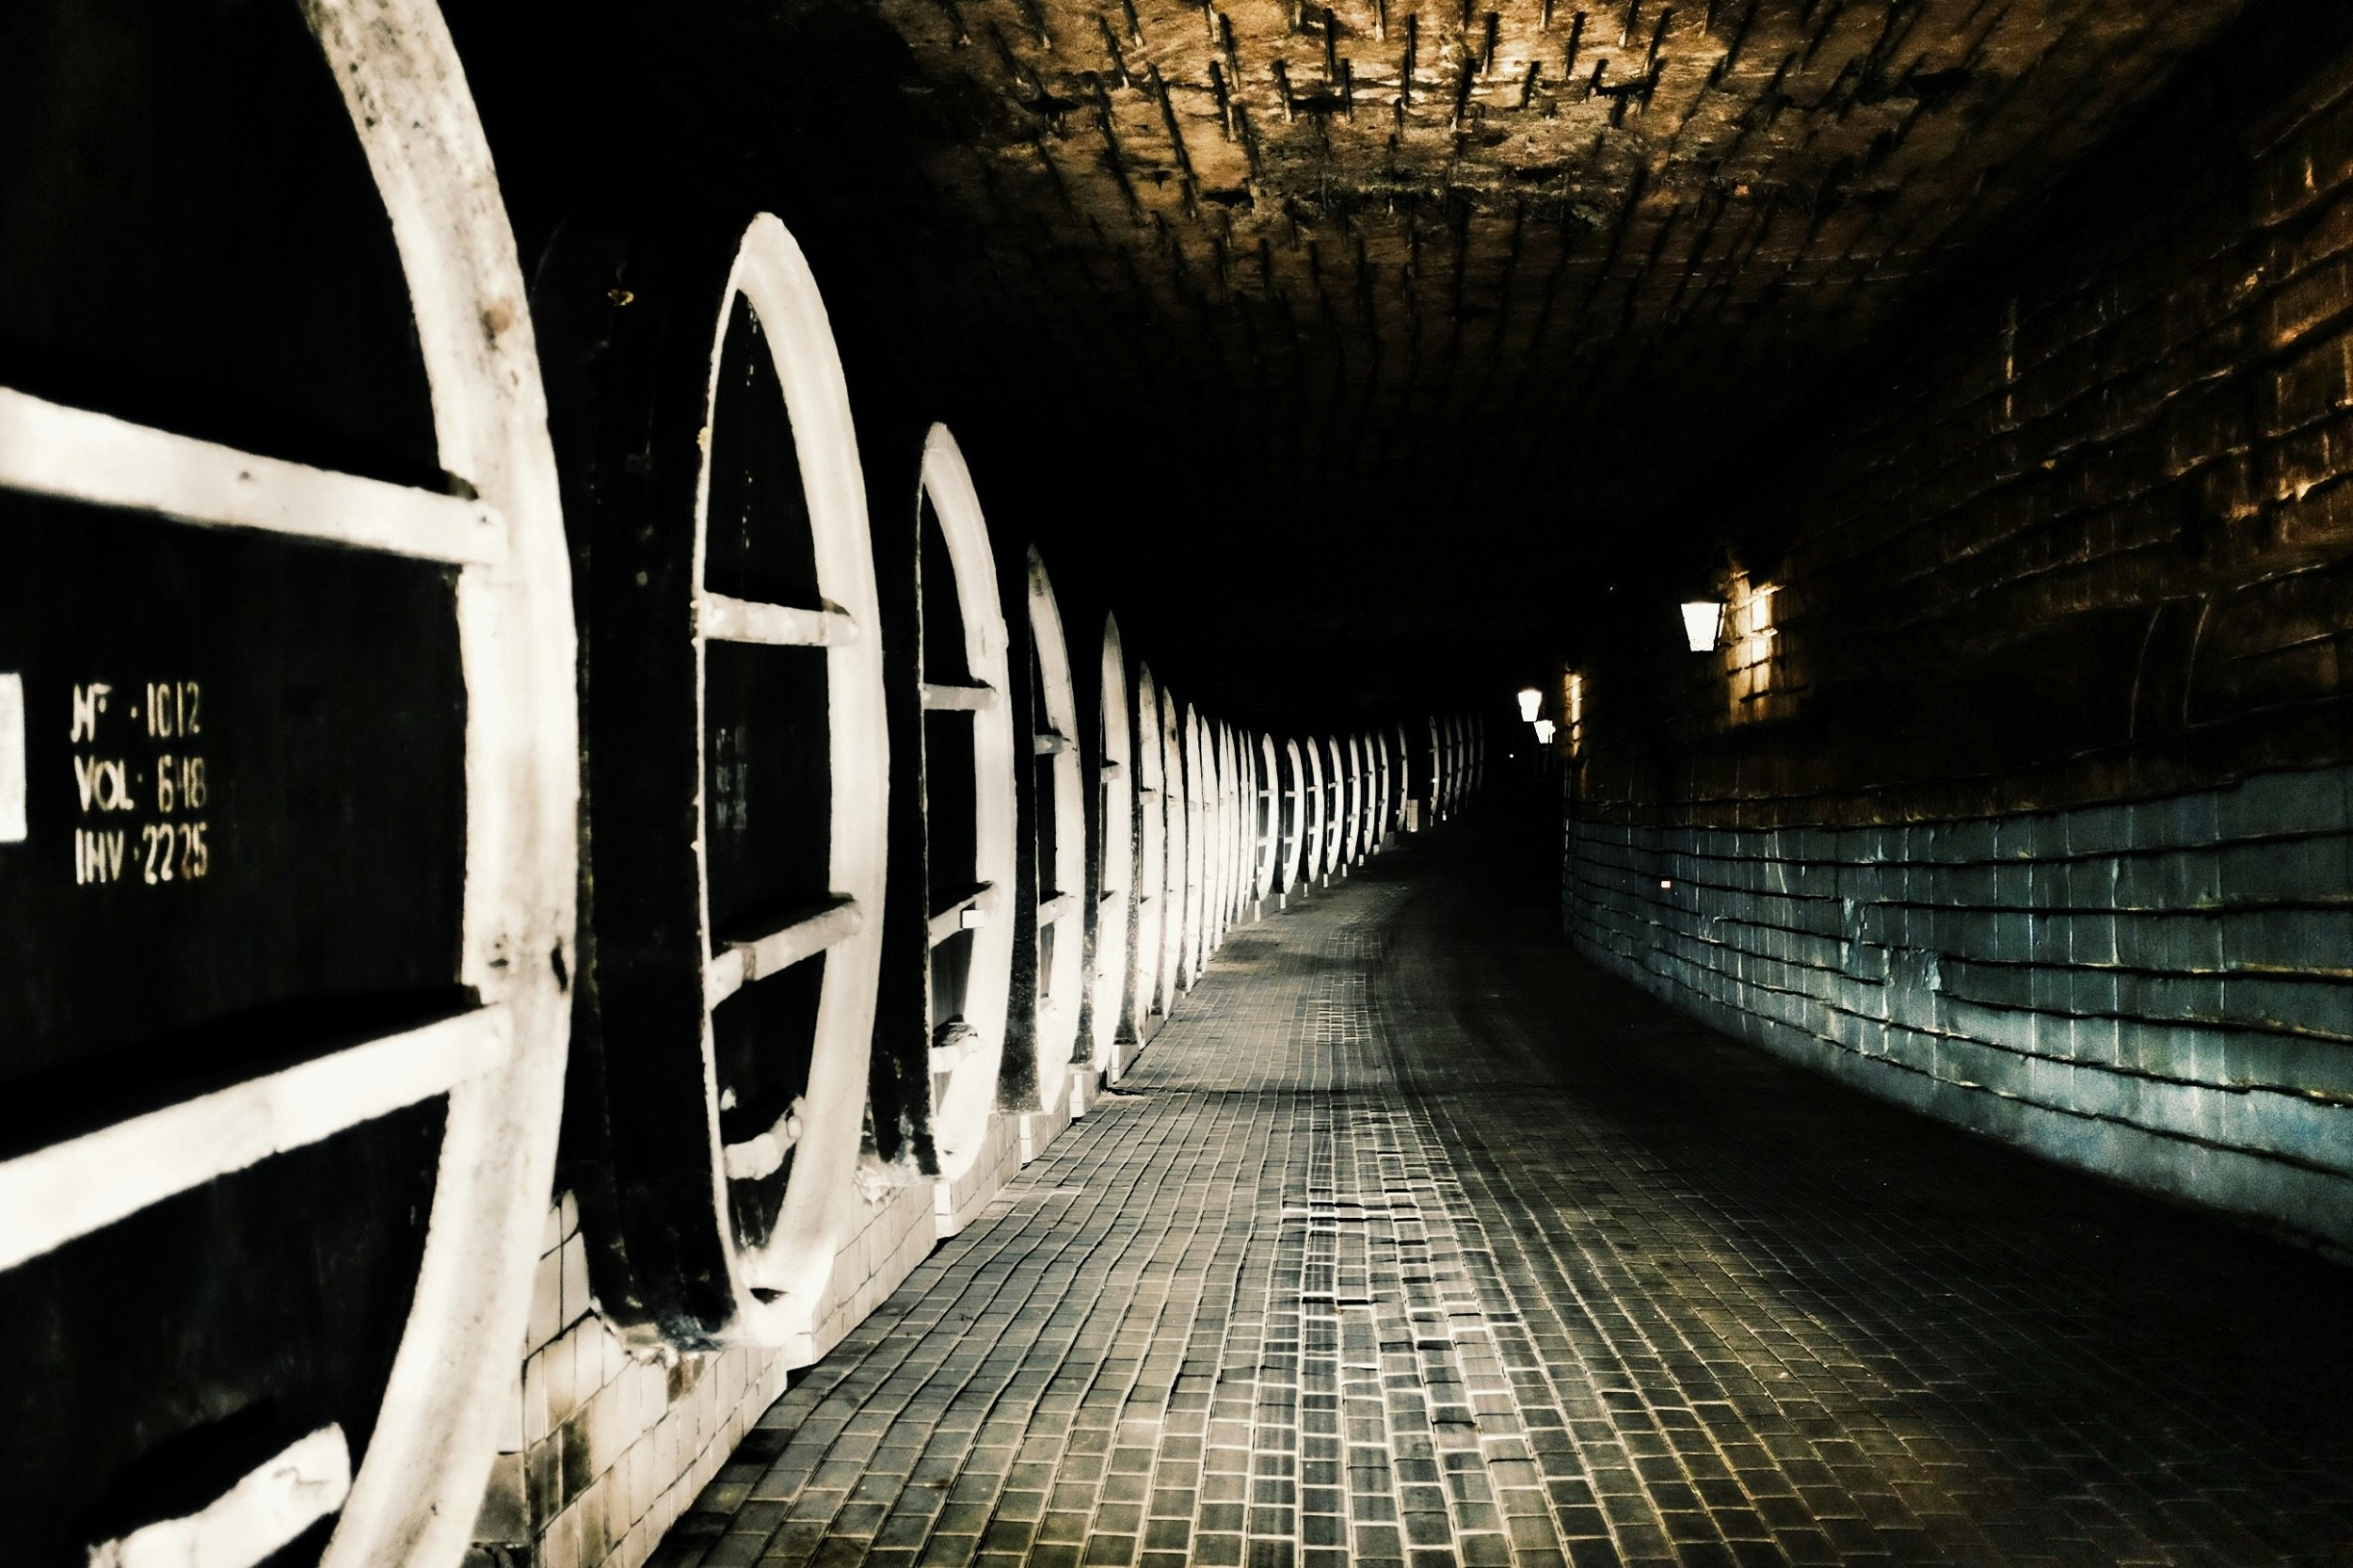 A dark wine cellar. Huge black barrels stand to the left, and a cobbled floor stretches into the darkness